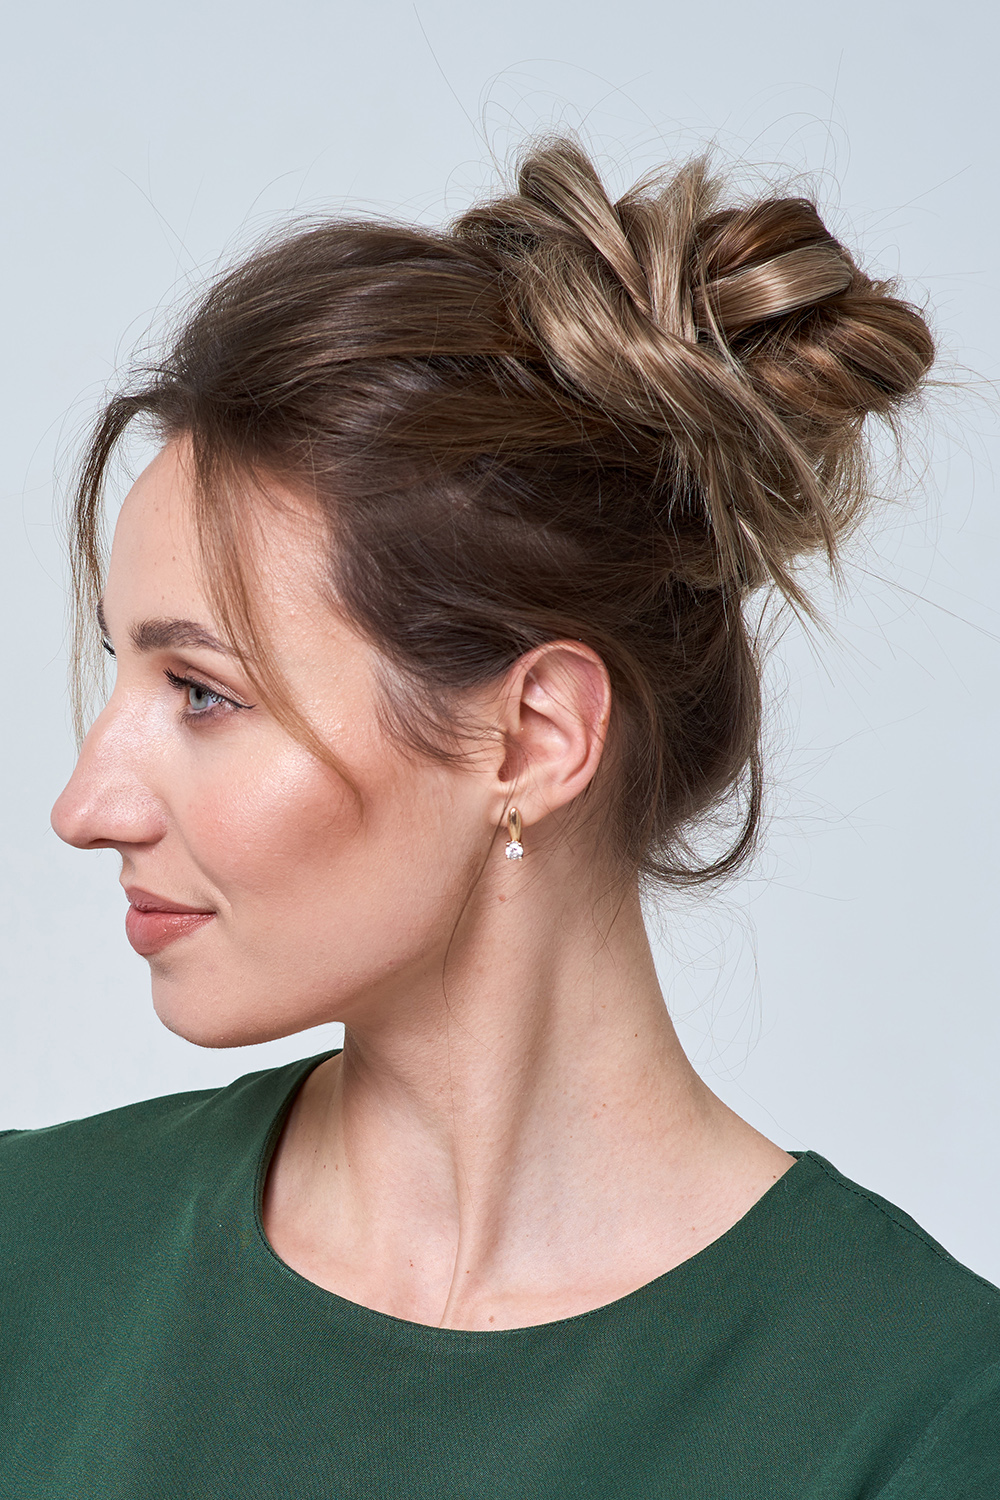 How to Make a Perfect Messy Bun, No Matter Your Hair Length